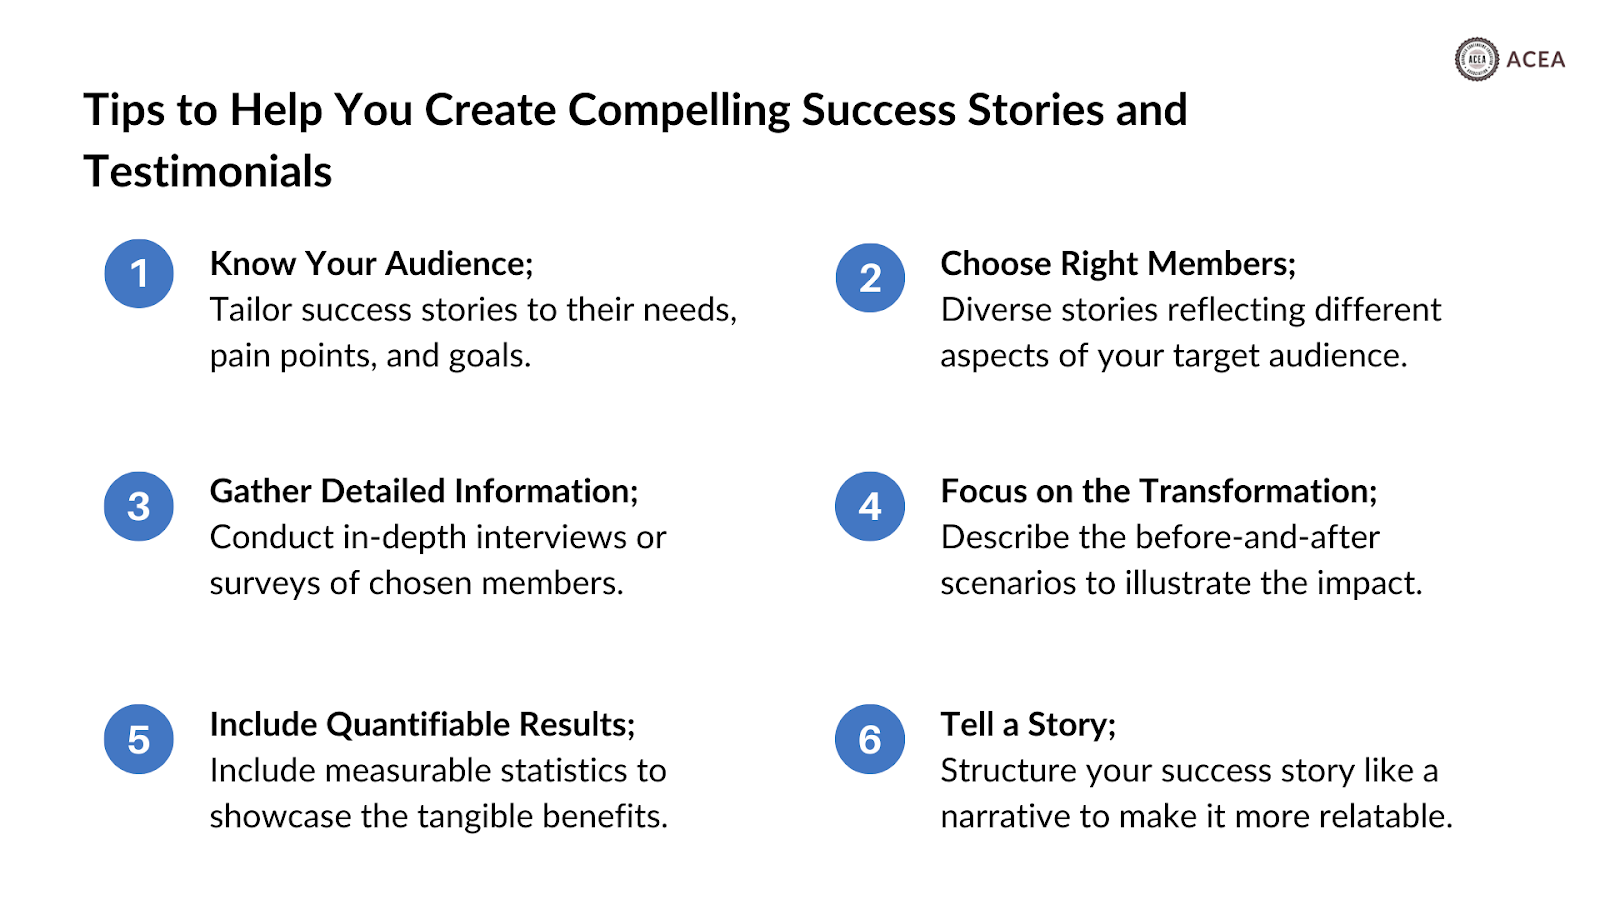 Tips to create compelling success stories and testimonials